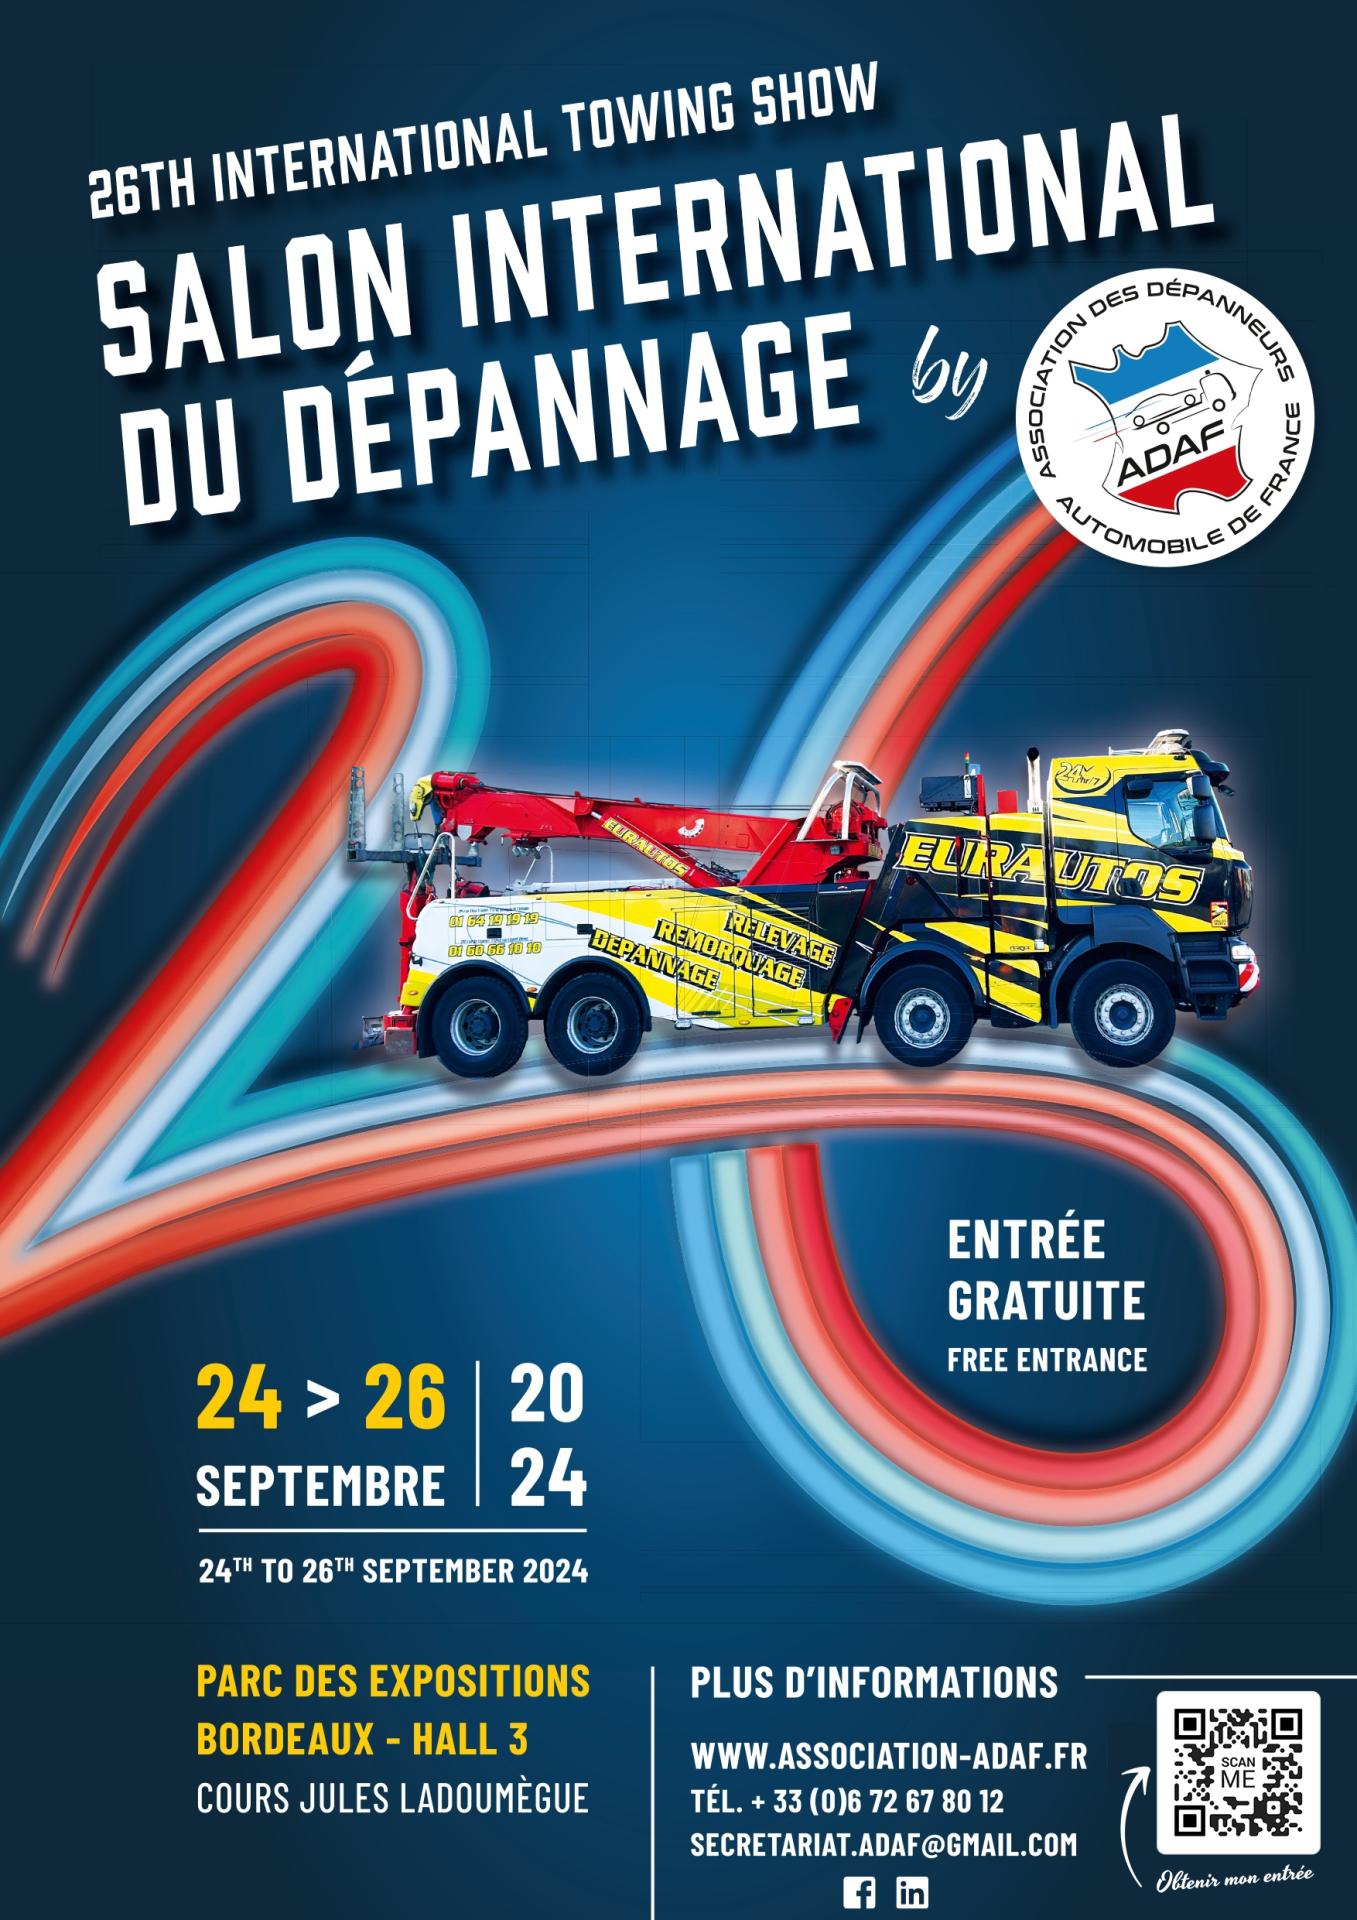 France : The 26th Tow Show organized by ADAF